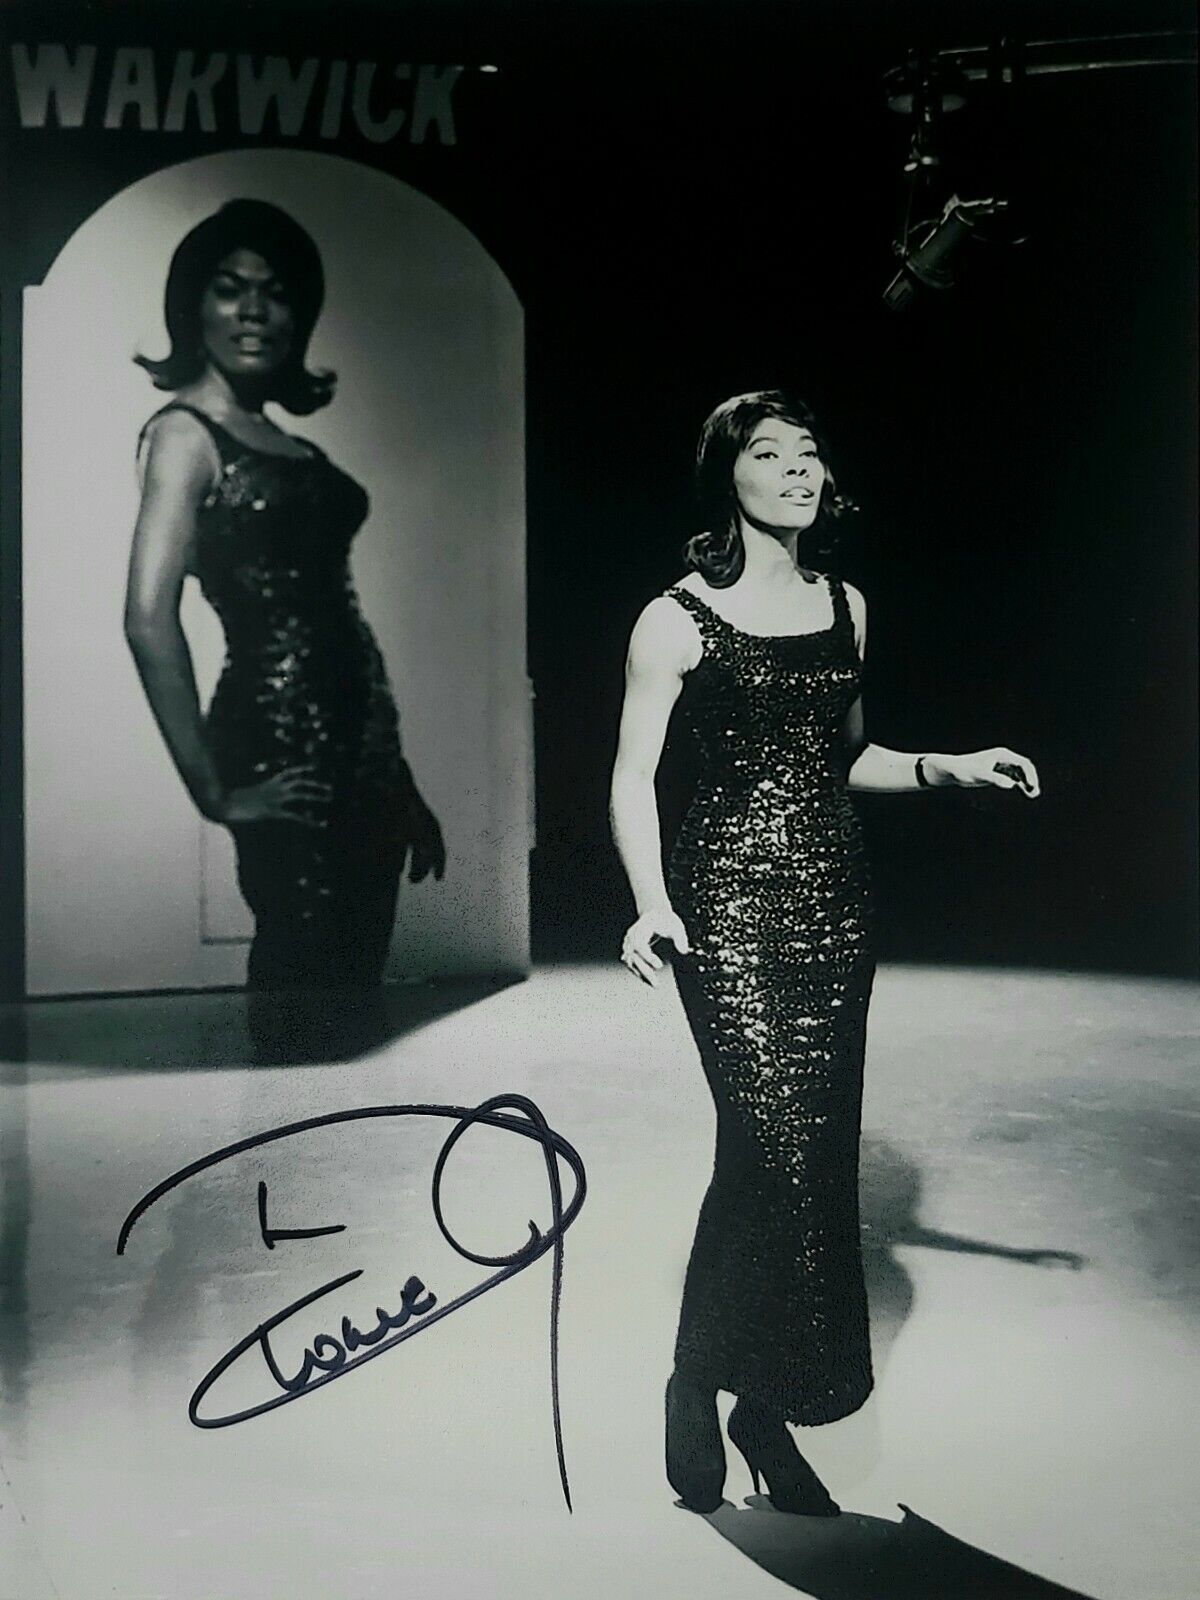 Dionne Warwick Hand Signed Autograph Photo Poster painting R&B Singer I Say a Little Prayer